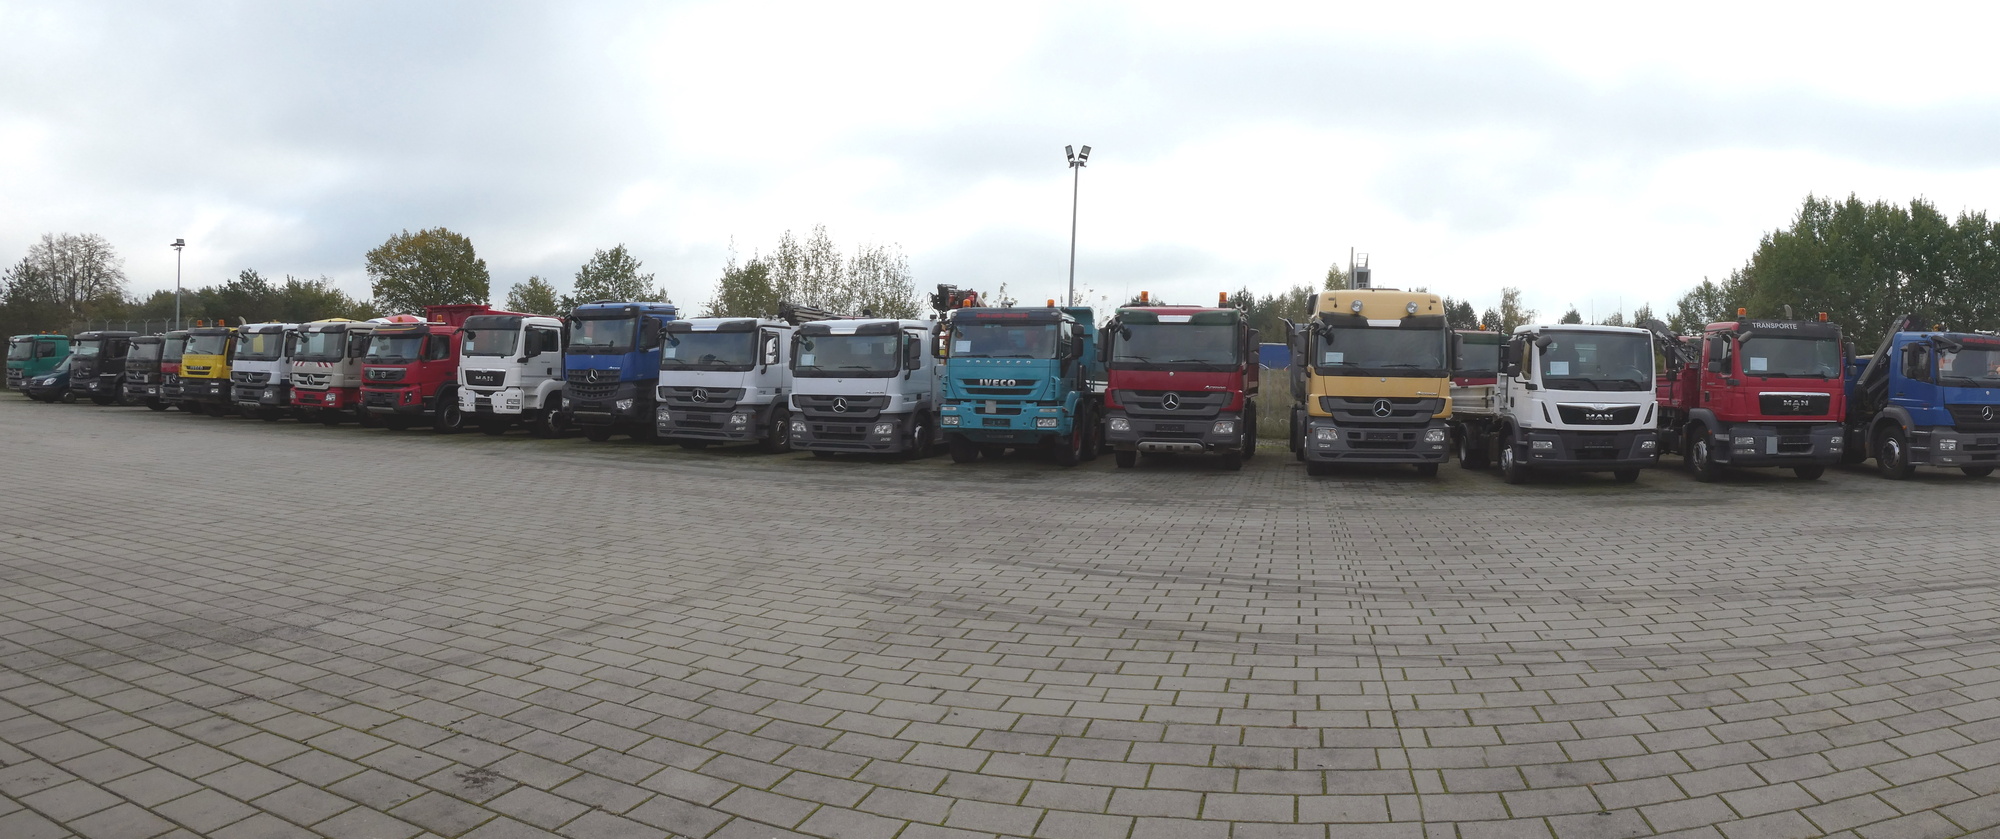 Henze Truck GmbH - Attachments undefined: picture 1